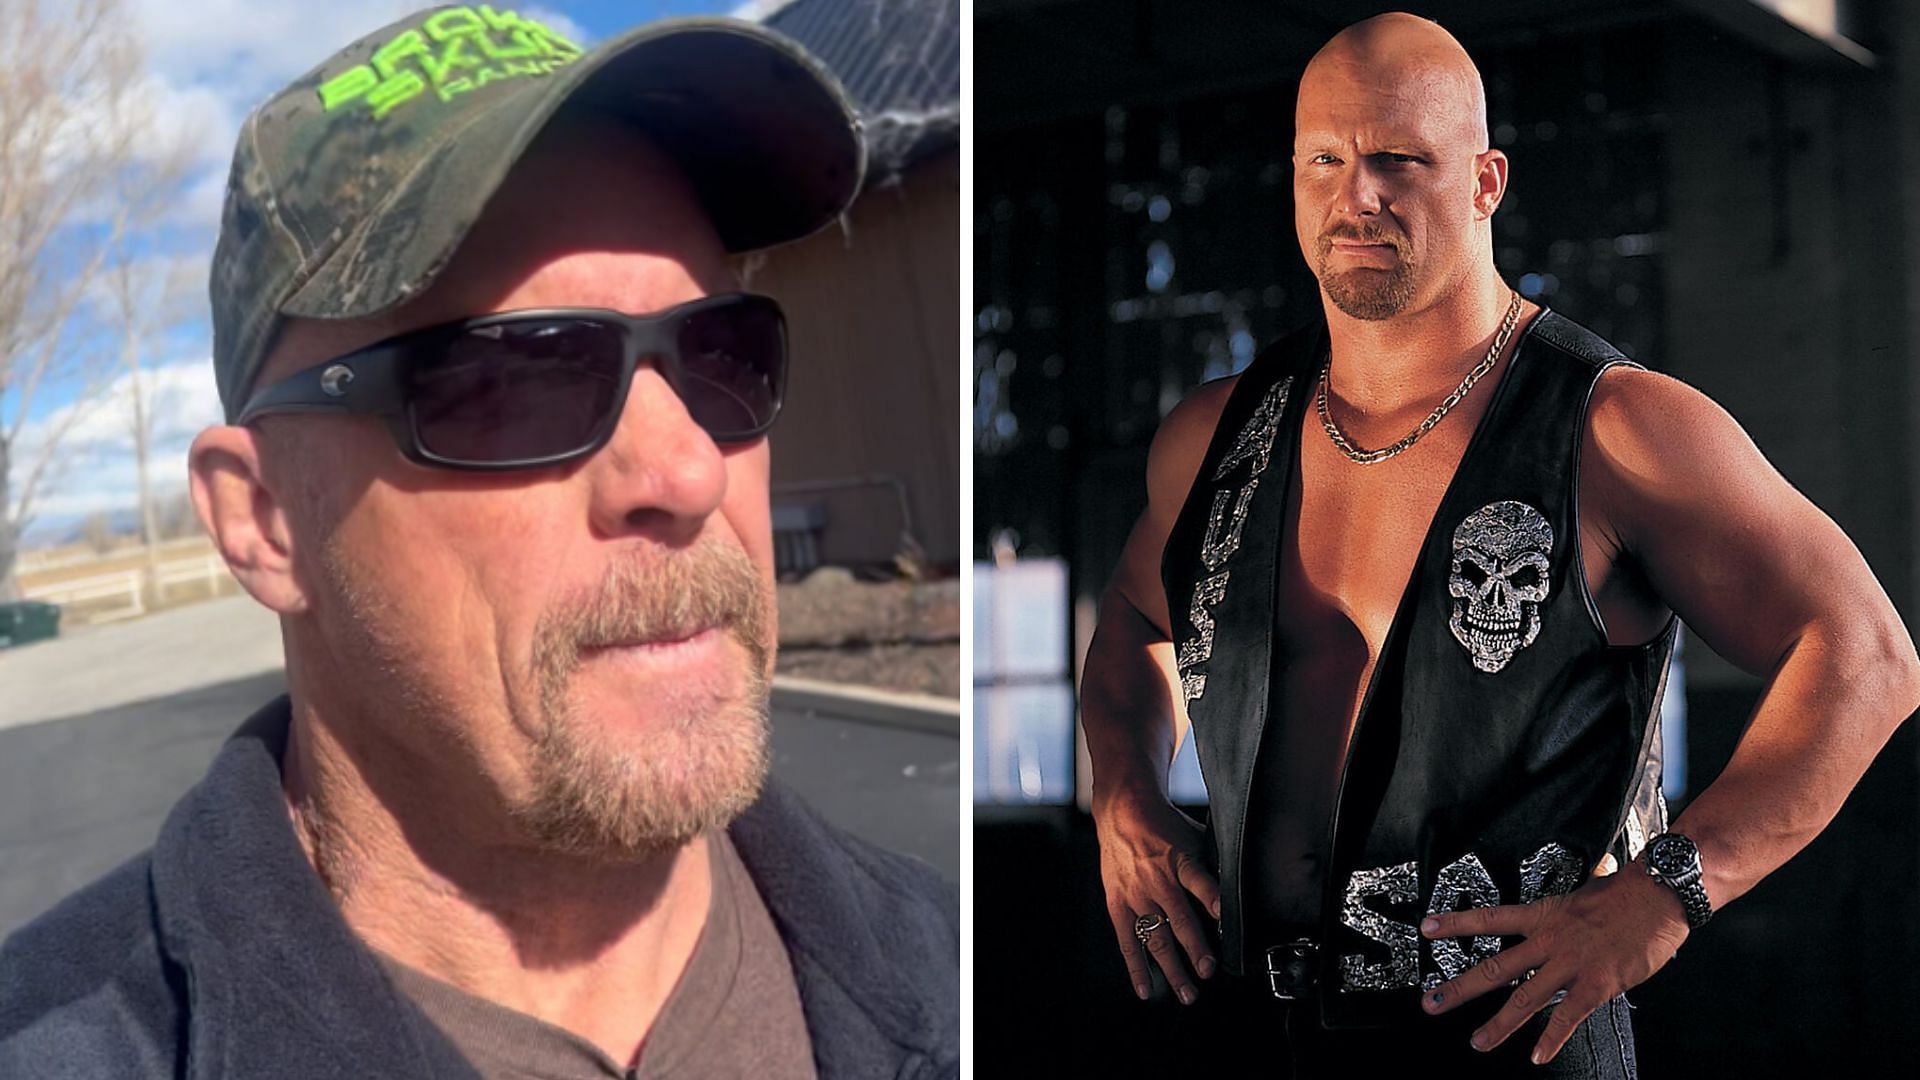 Stone Cold Steve Austin is a WWE Hall of Famer [Image credits: star